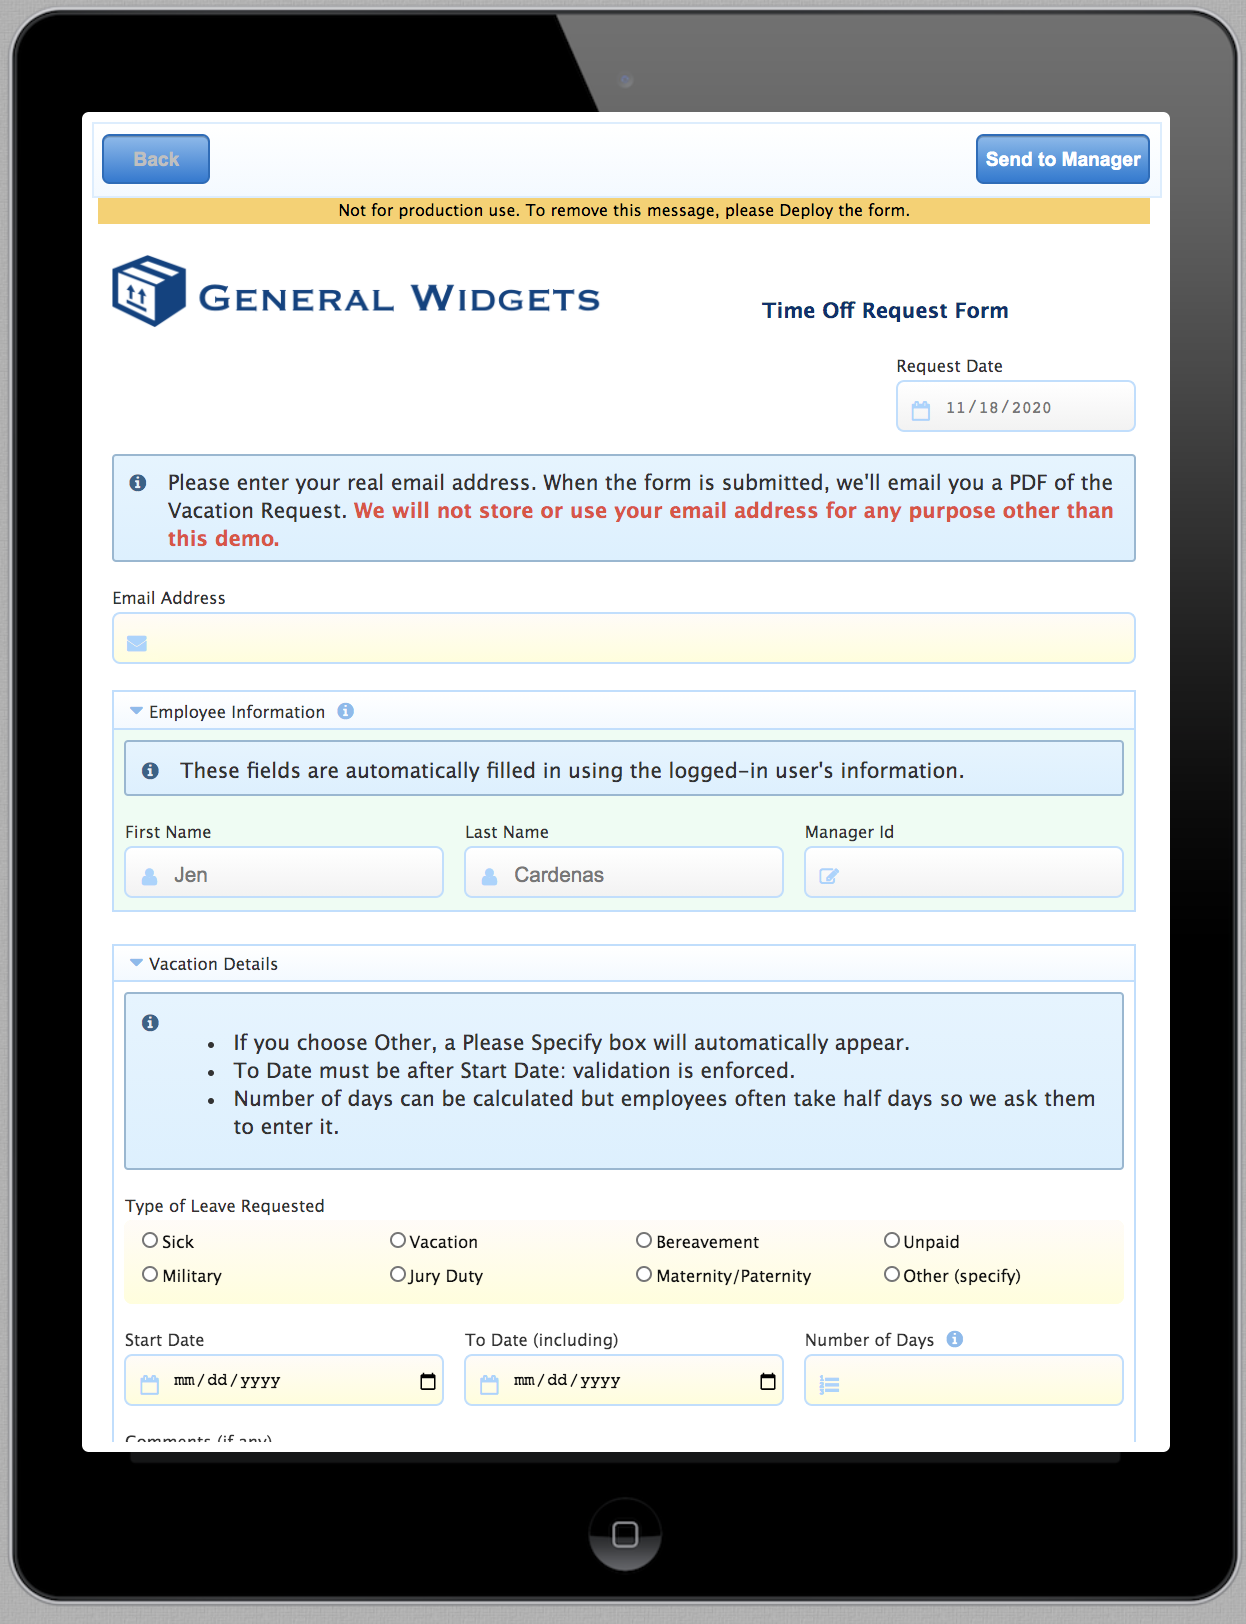 Testing an electronic signature workflow on mobile devices